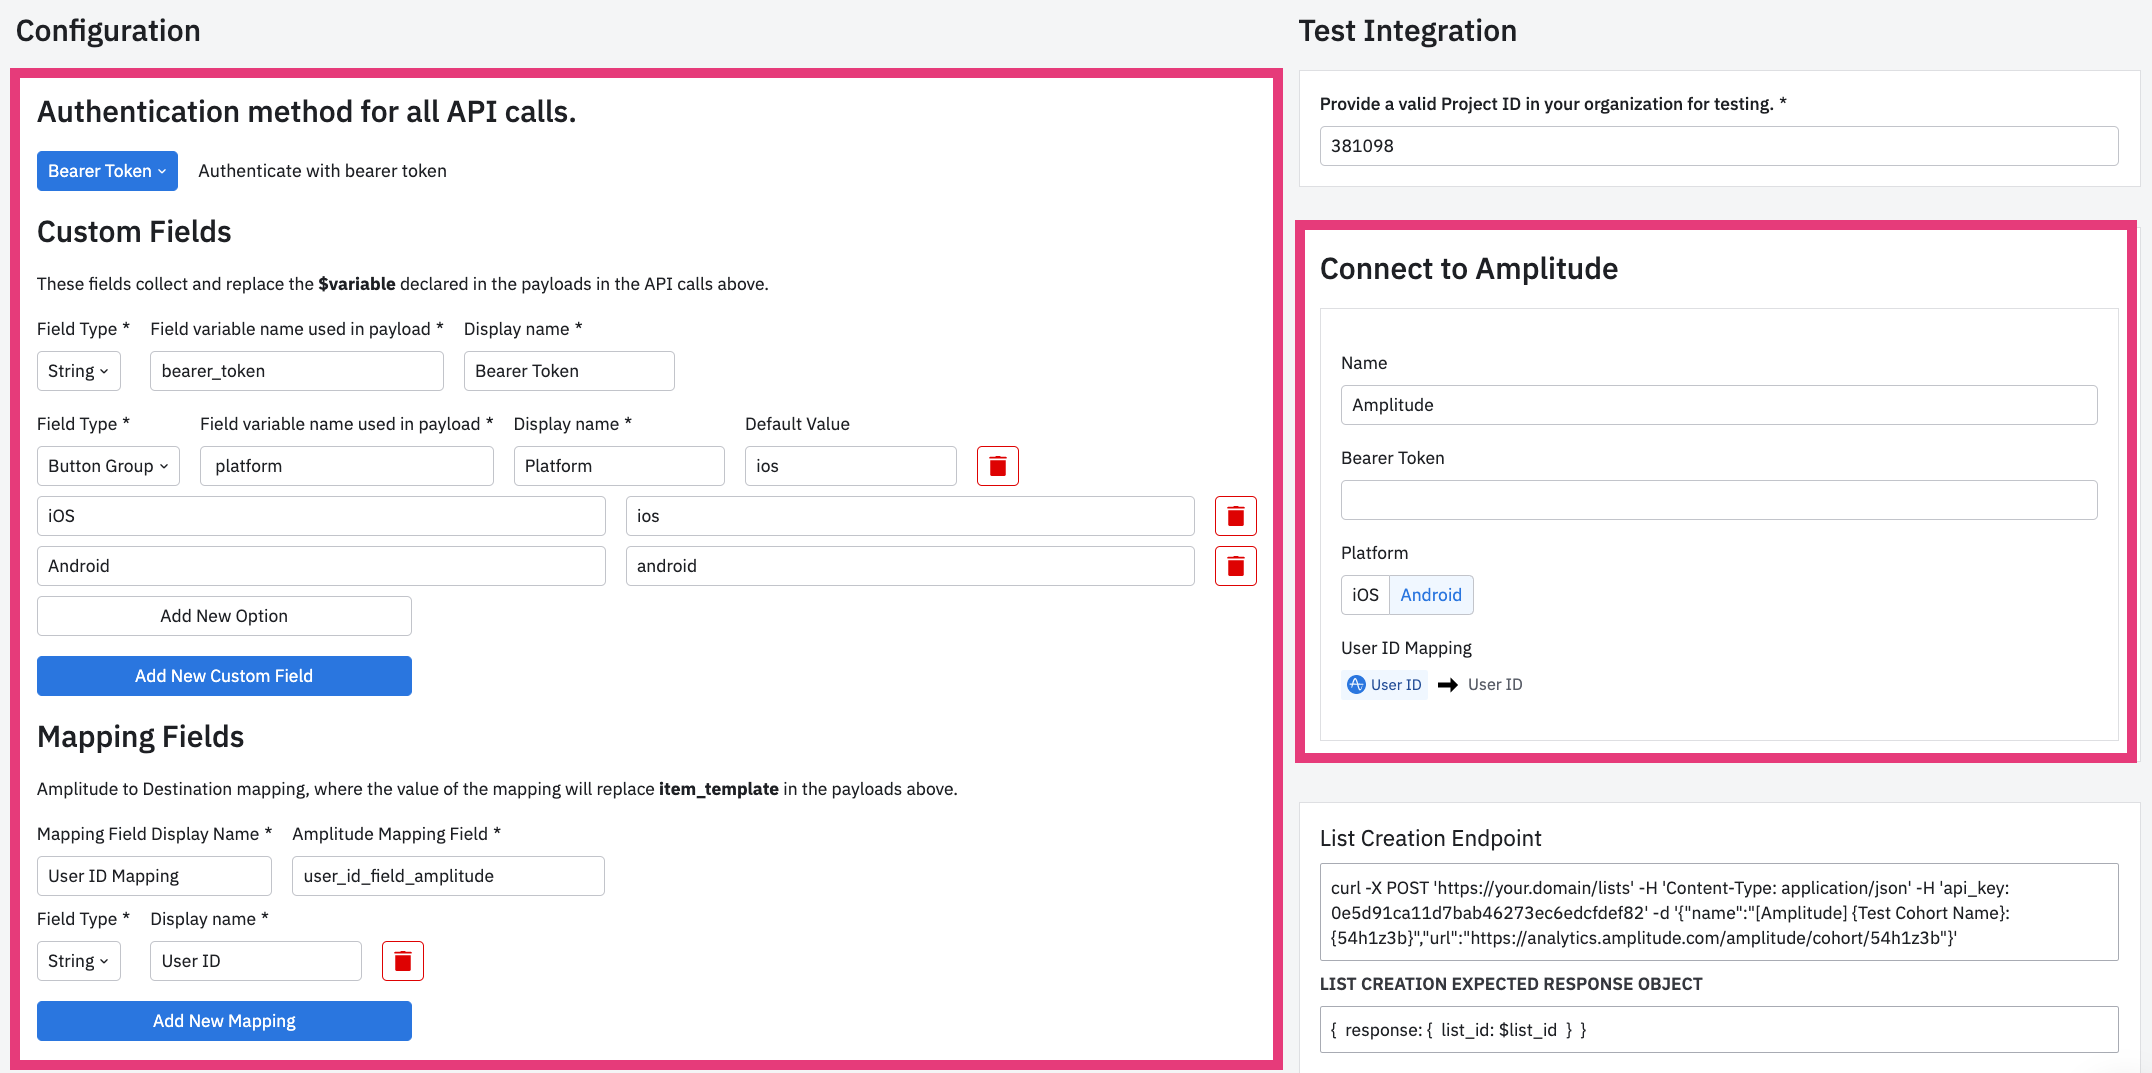 An illustrative example for a simple configuration for Bearer Token. Note the Panel on the right "Connect to Amplitude" is the modal screen that the user will see when trying to setup your integration in Amplitude's destination page.